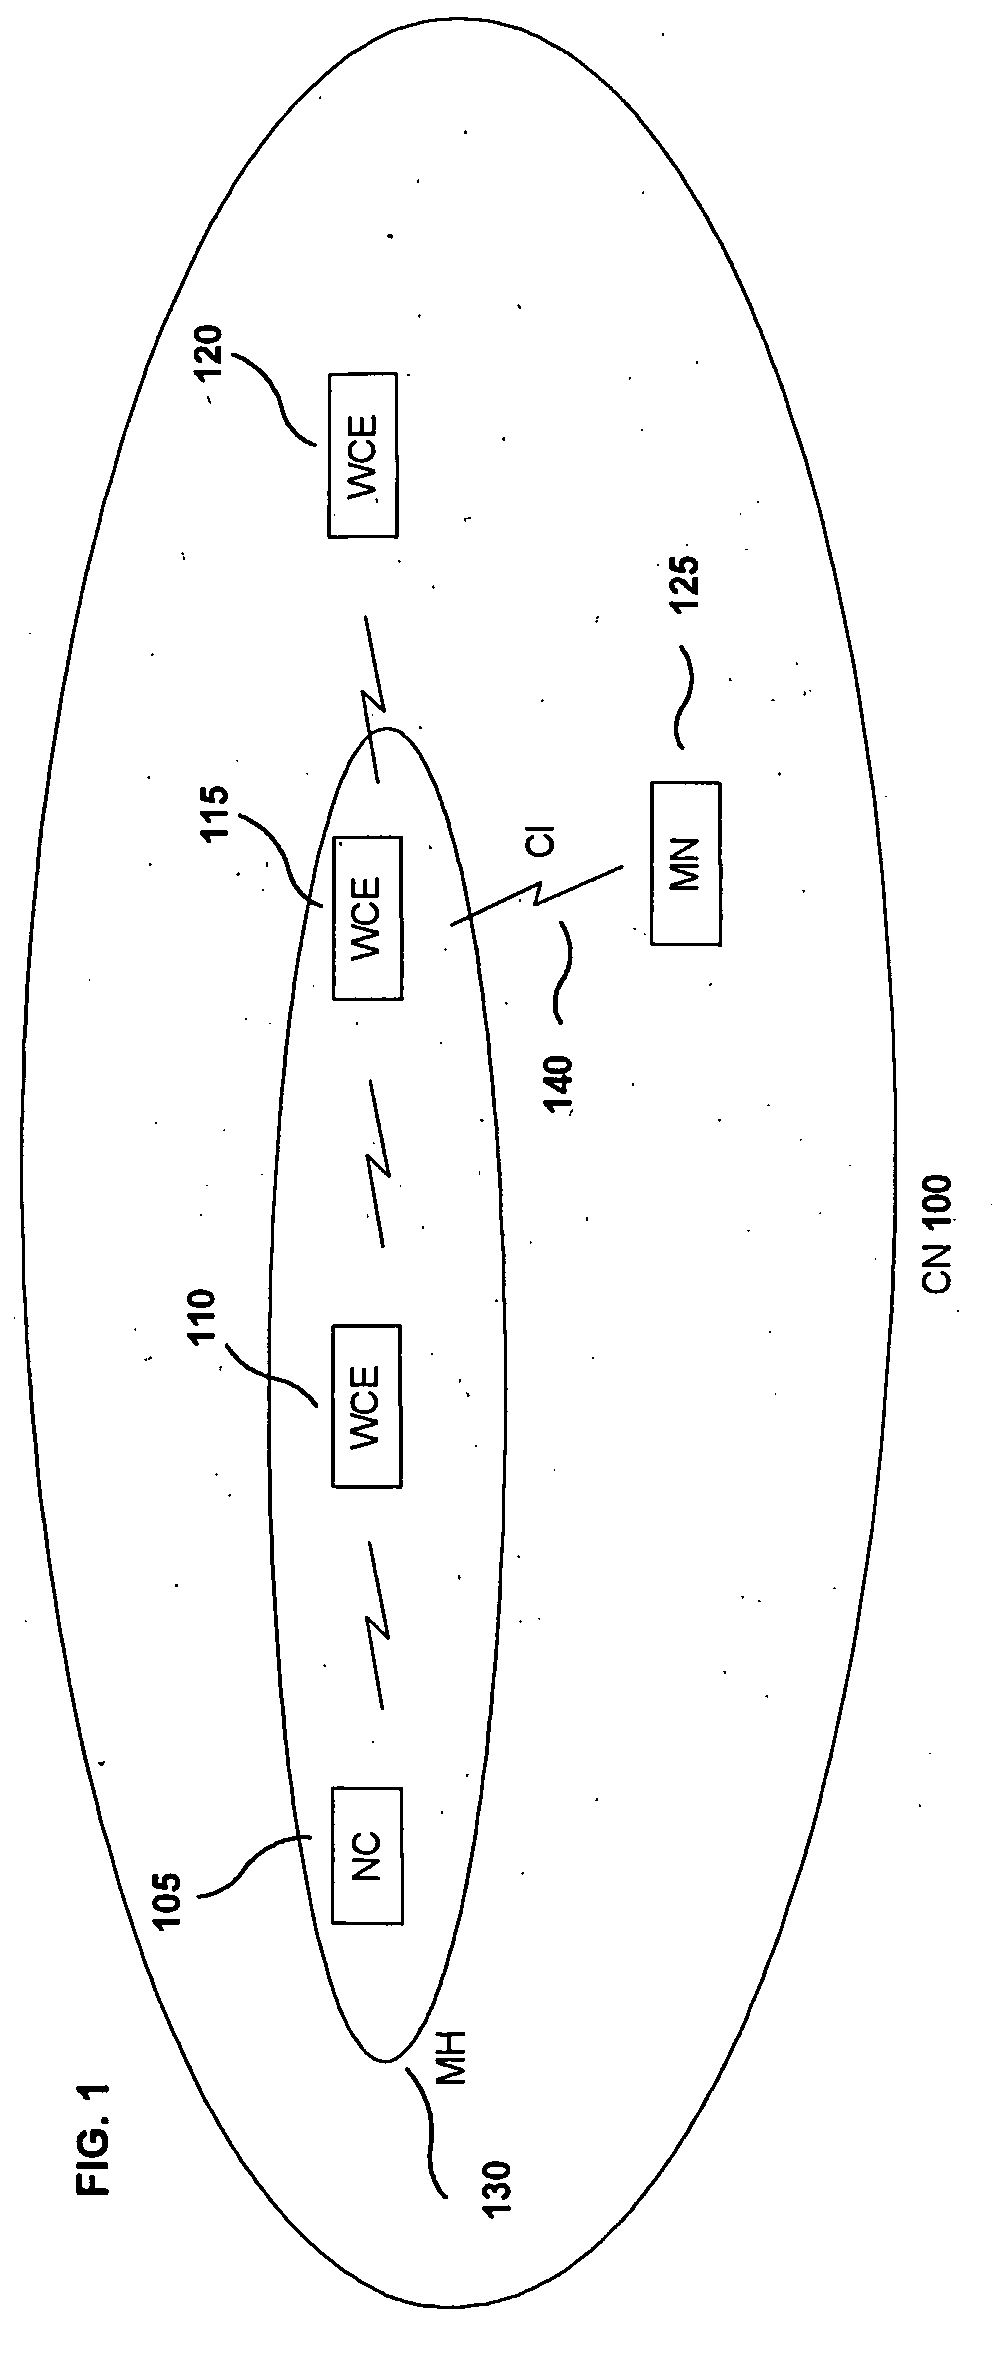 System and method for mobility in multihop networks